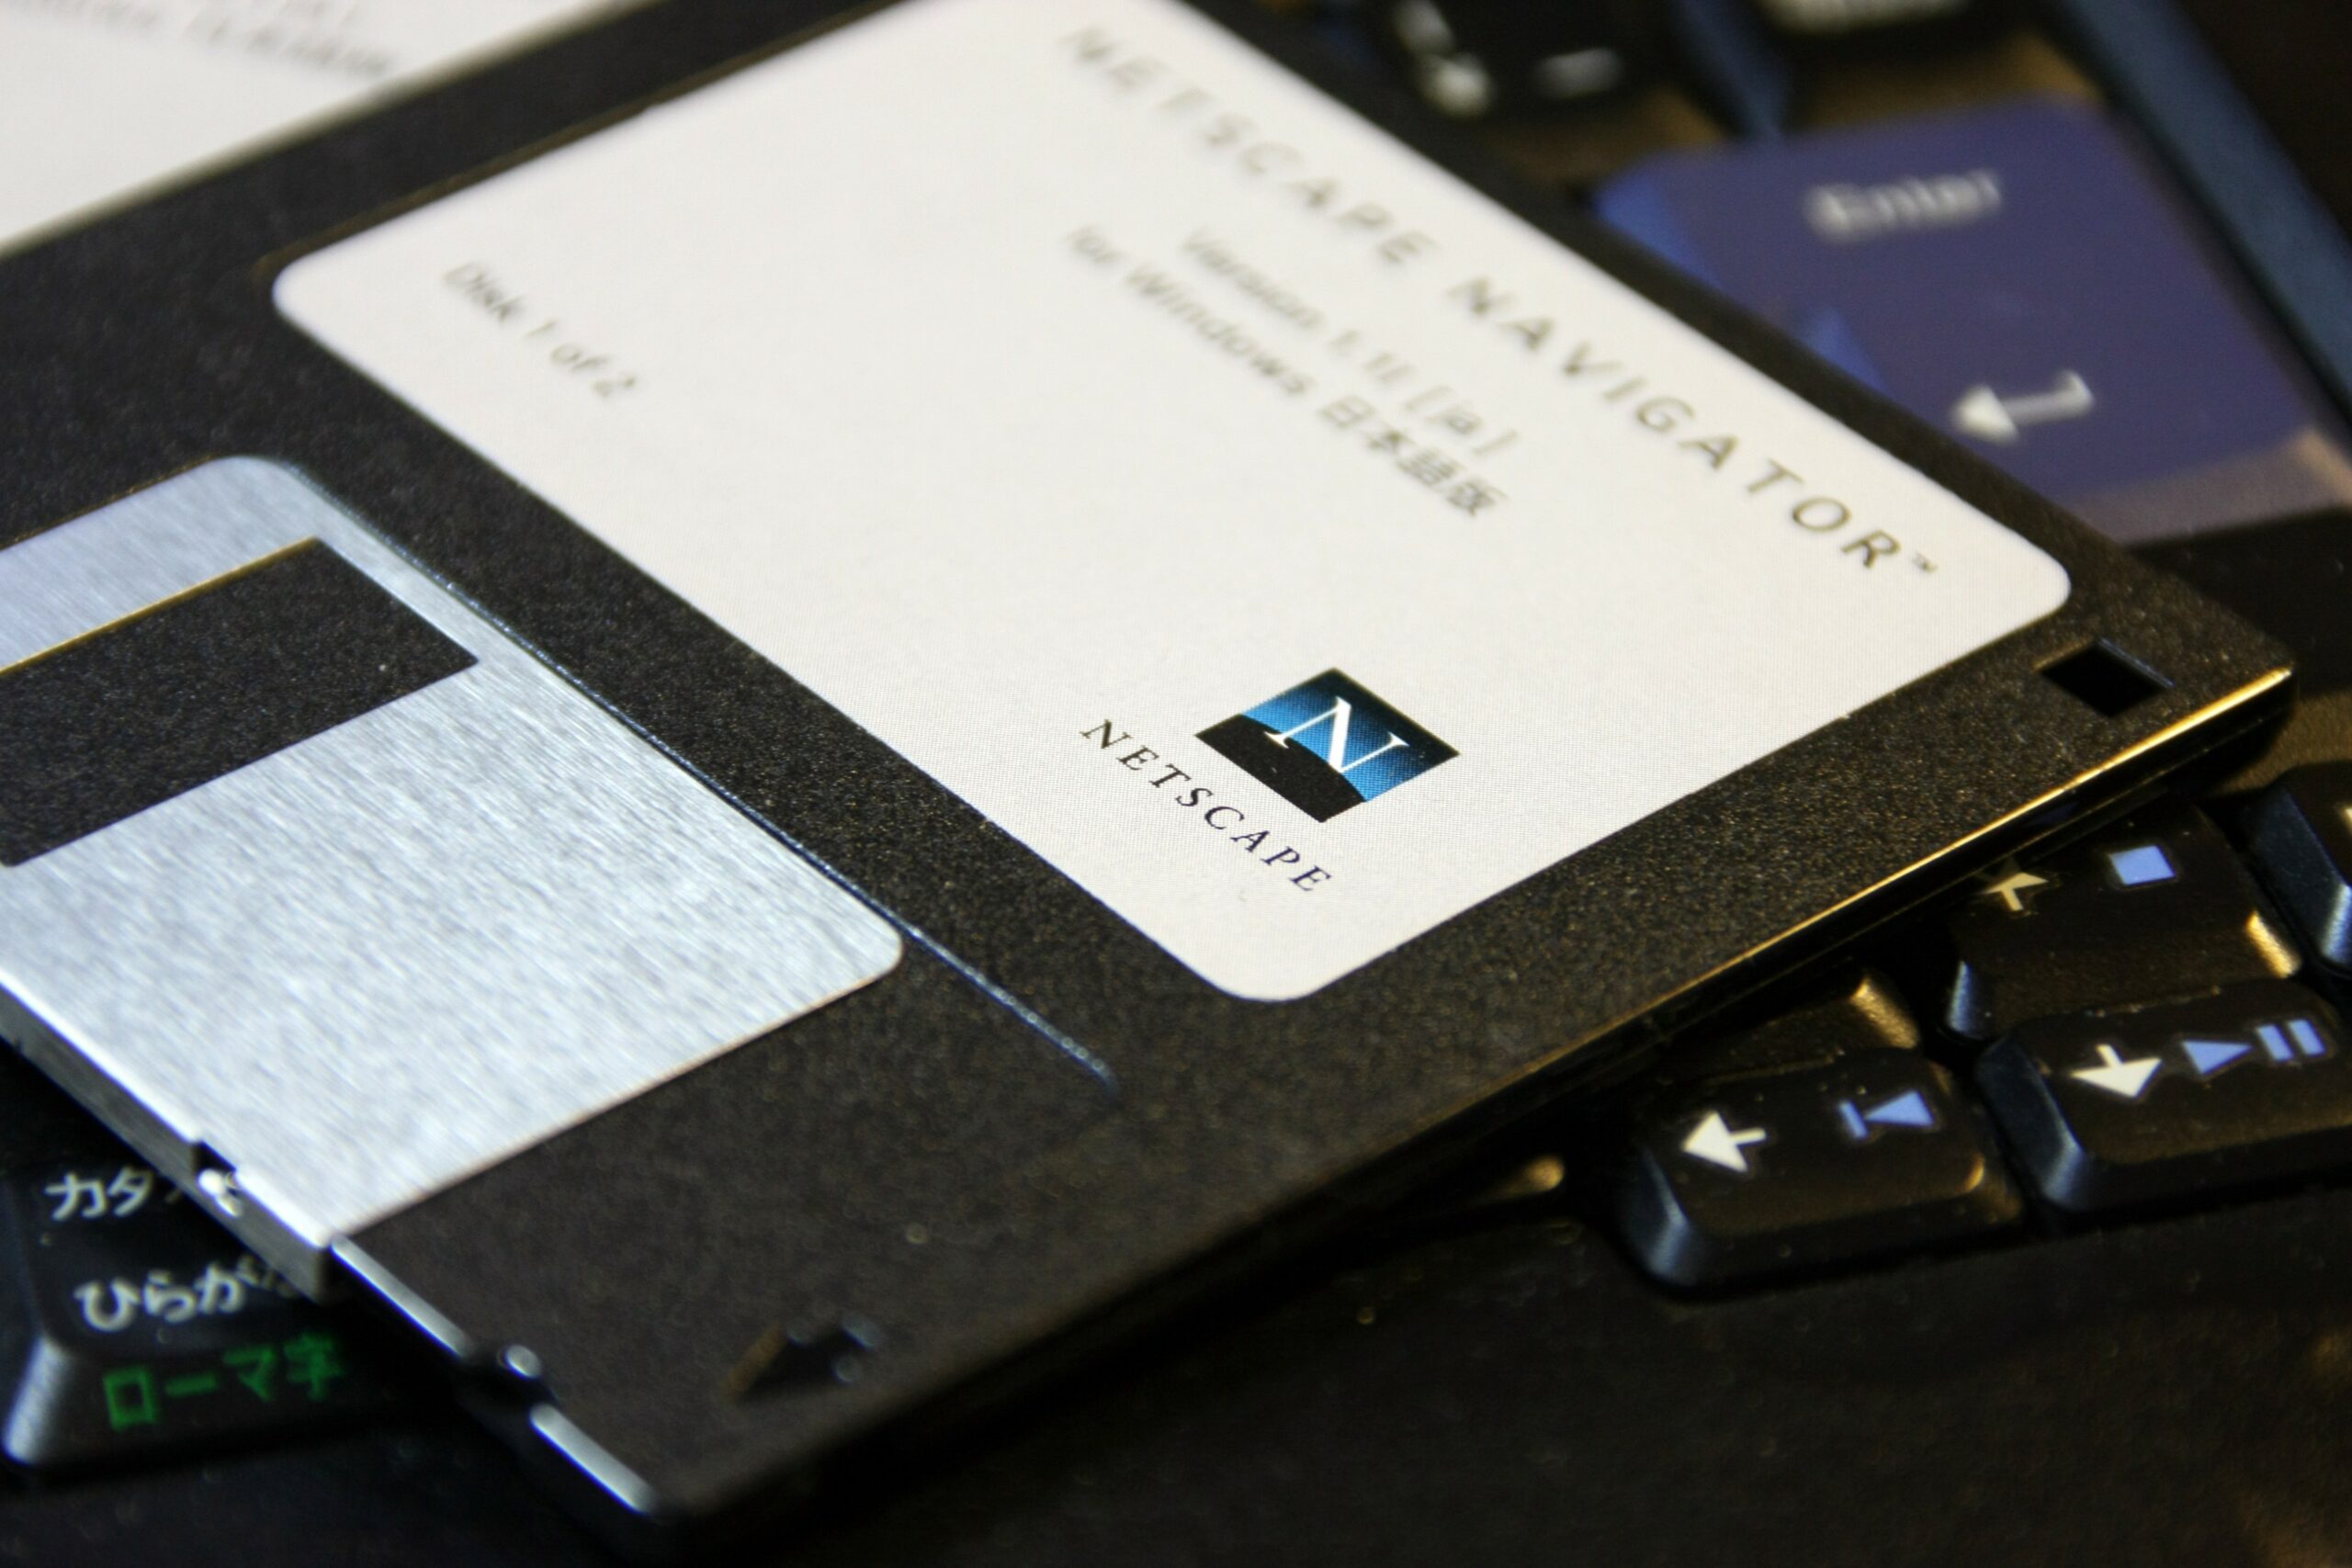 A floppy disk used for installing Netscape Navigator.